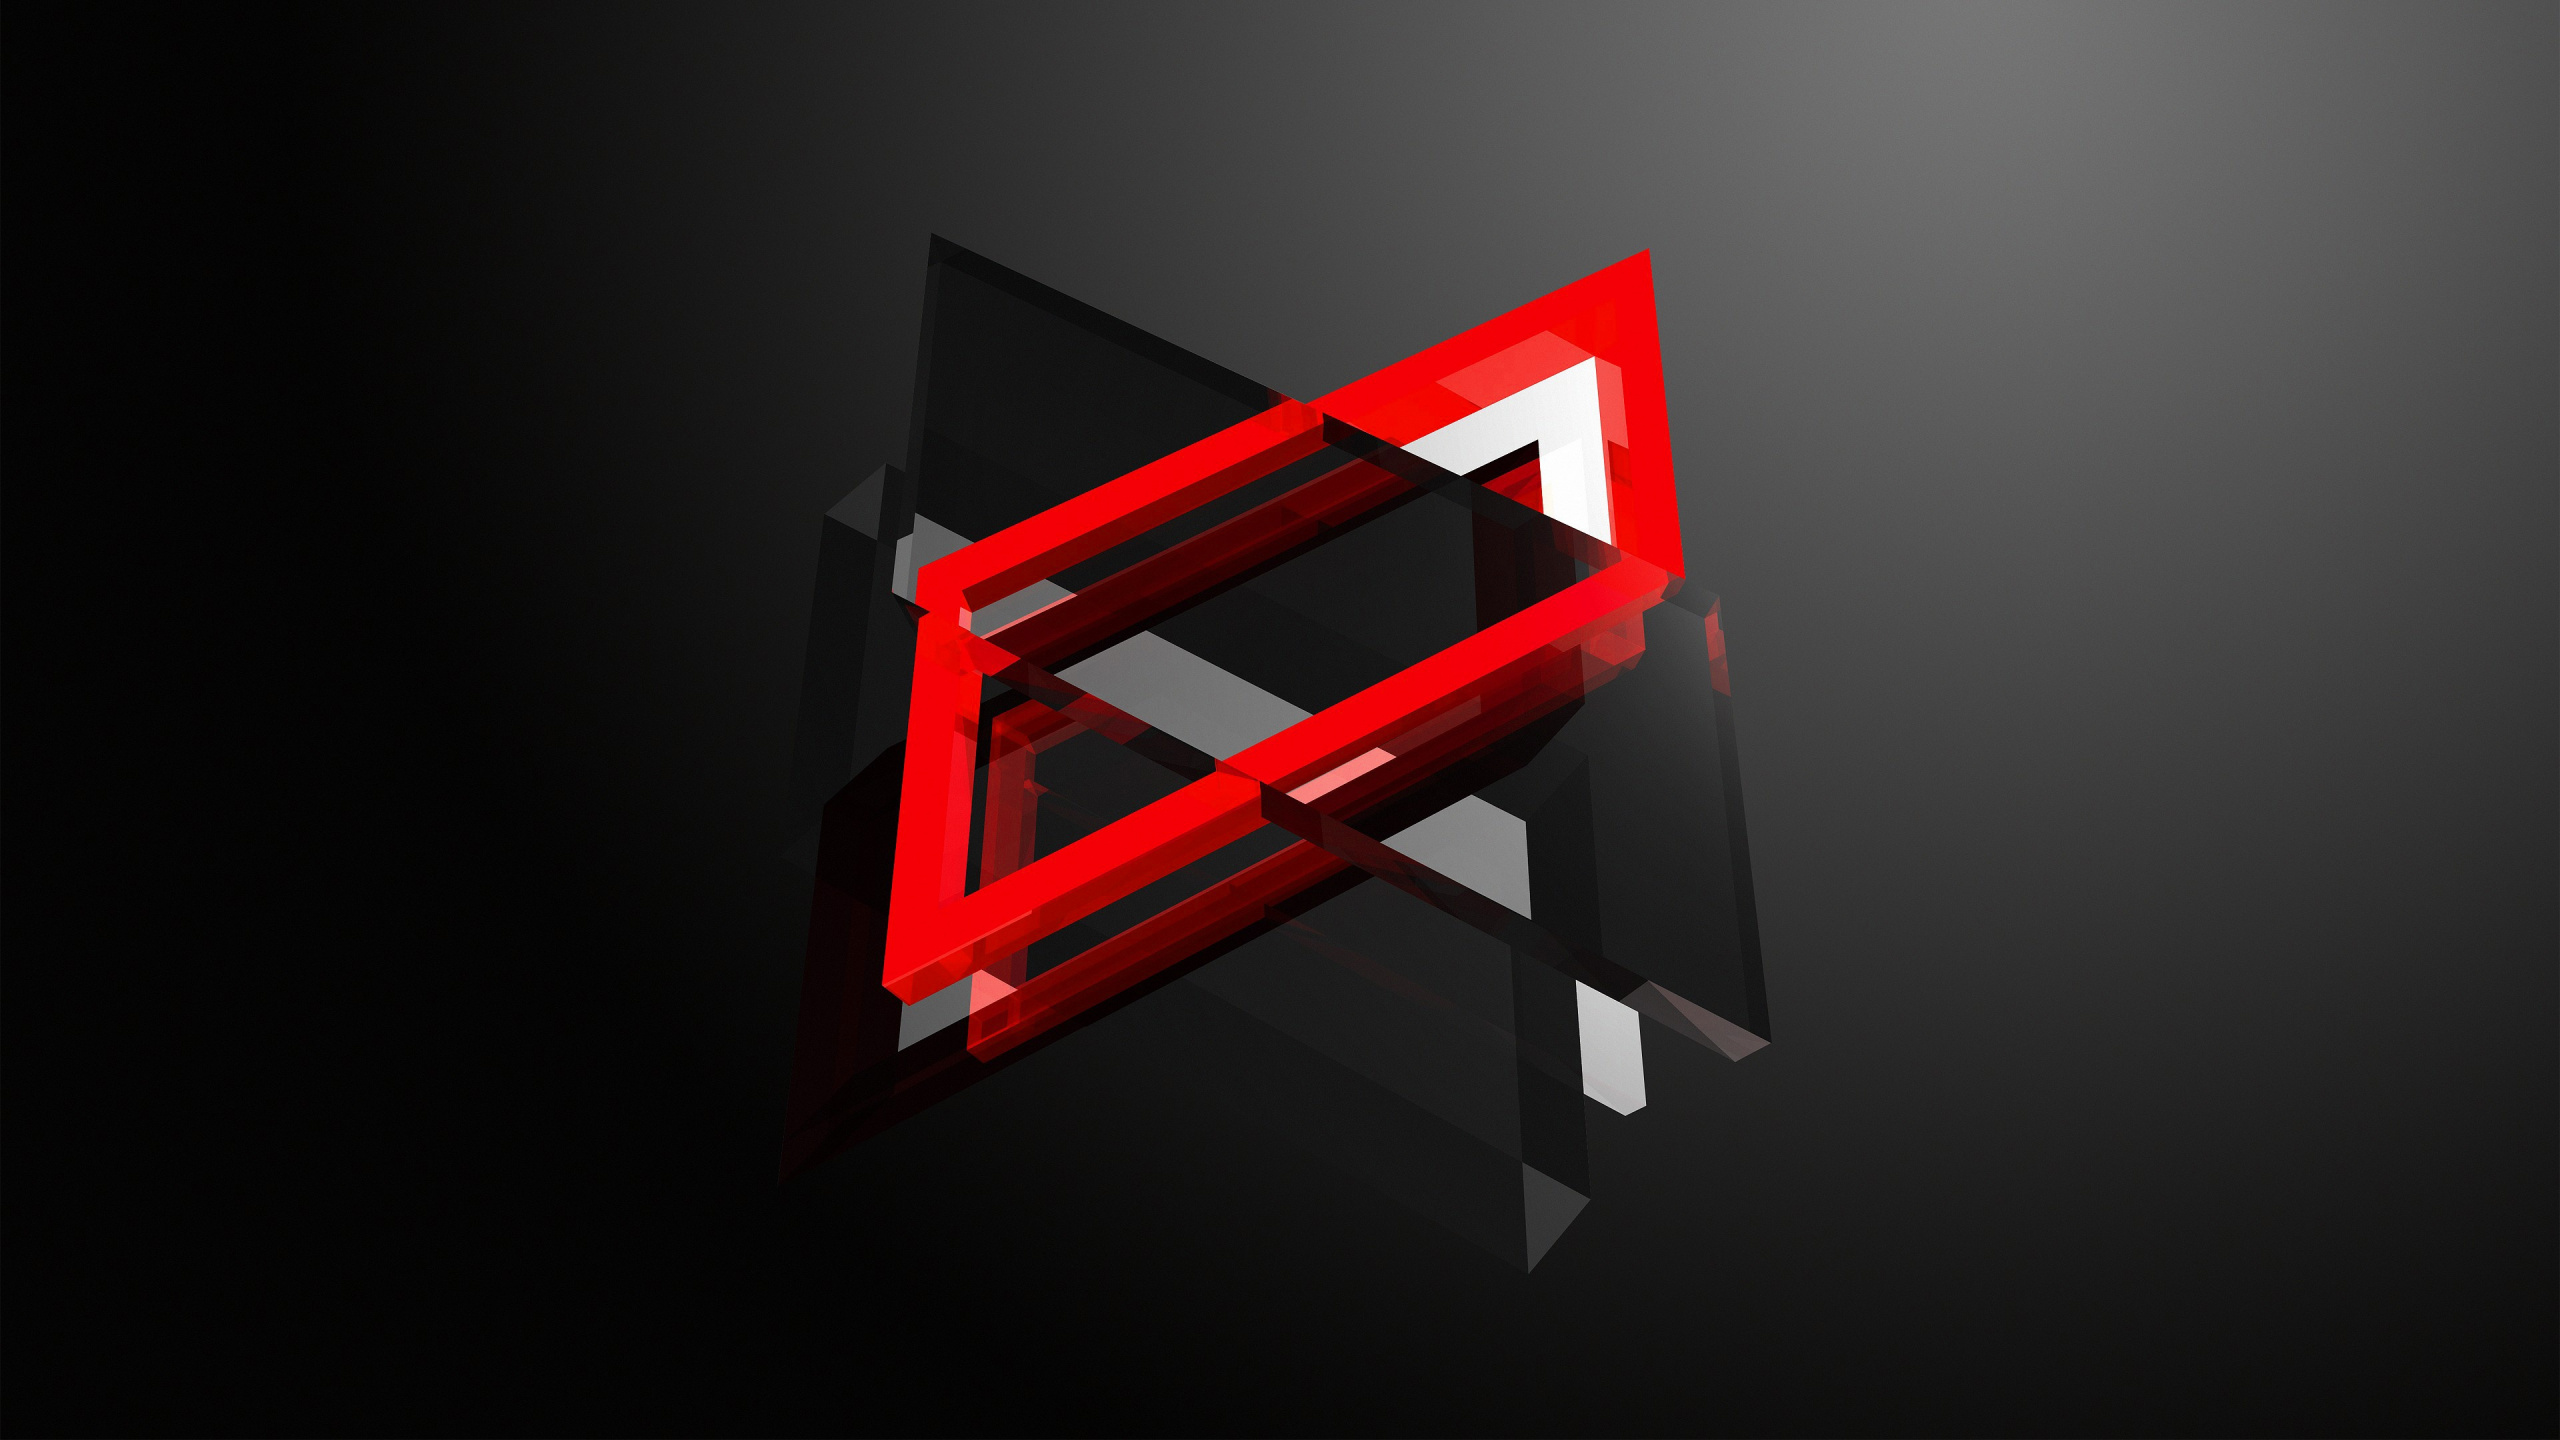 Red and Black Frame Illustration. Wallpaper in 2560x1440 Resolution